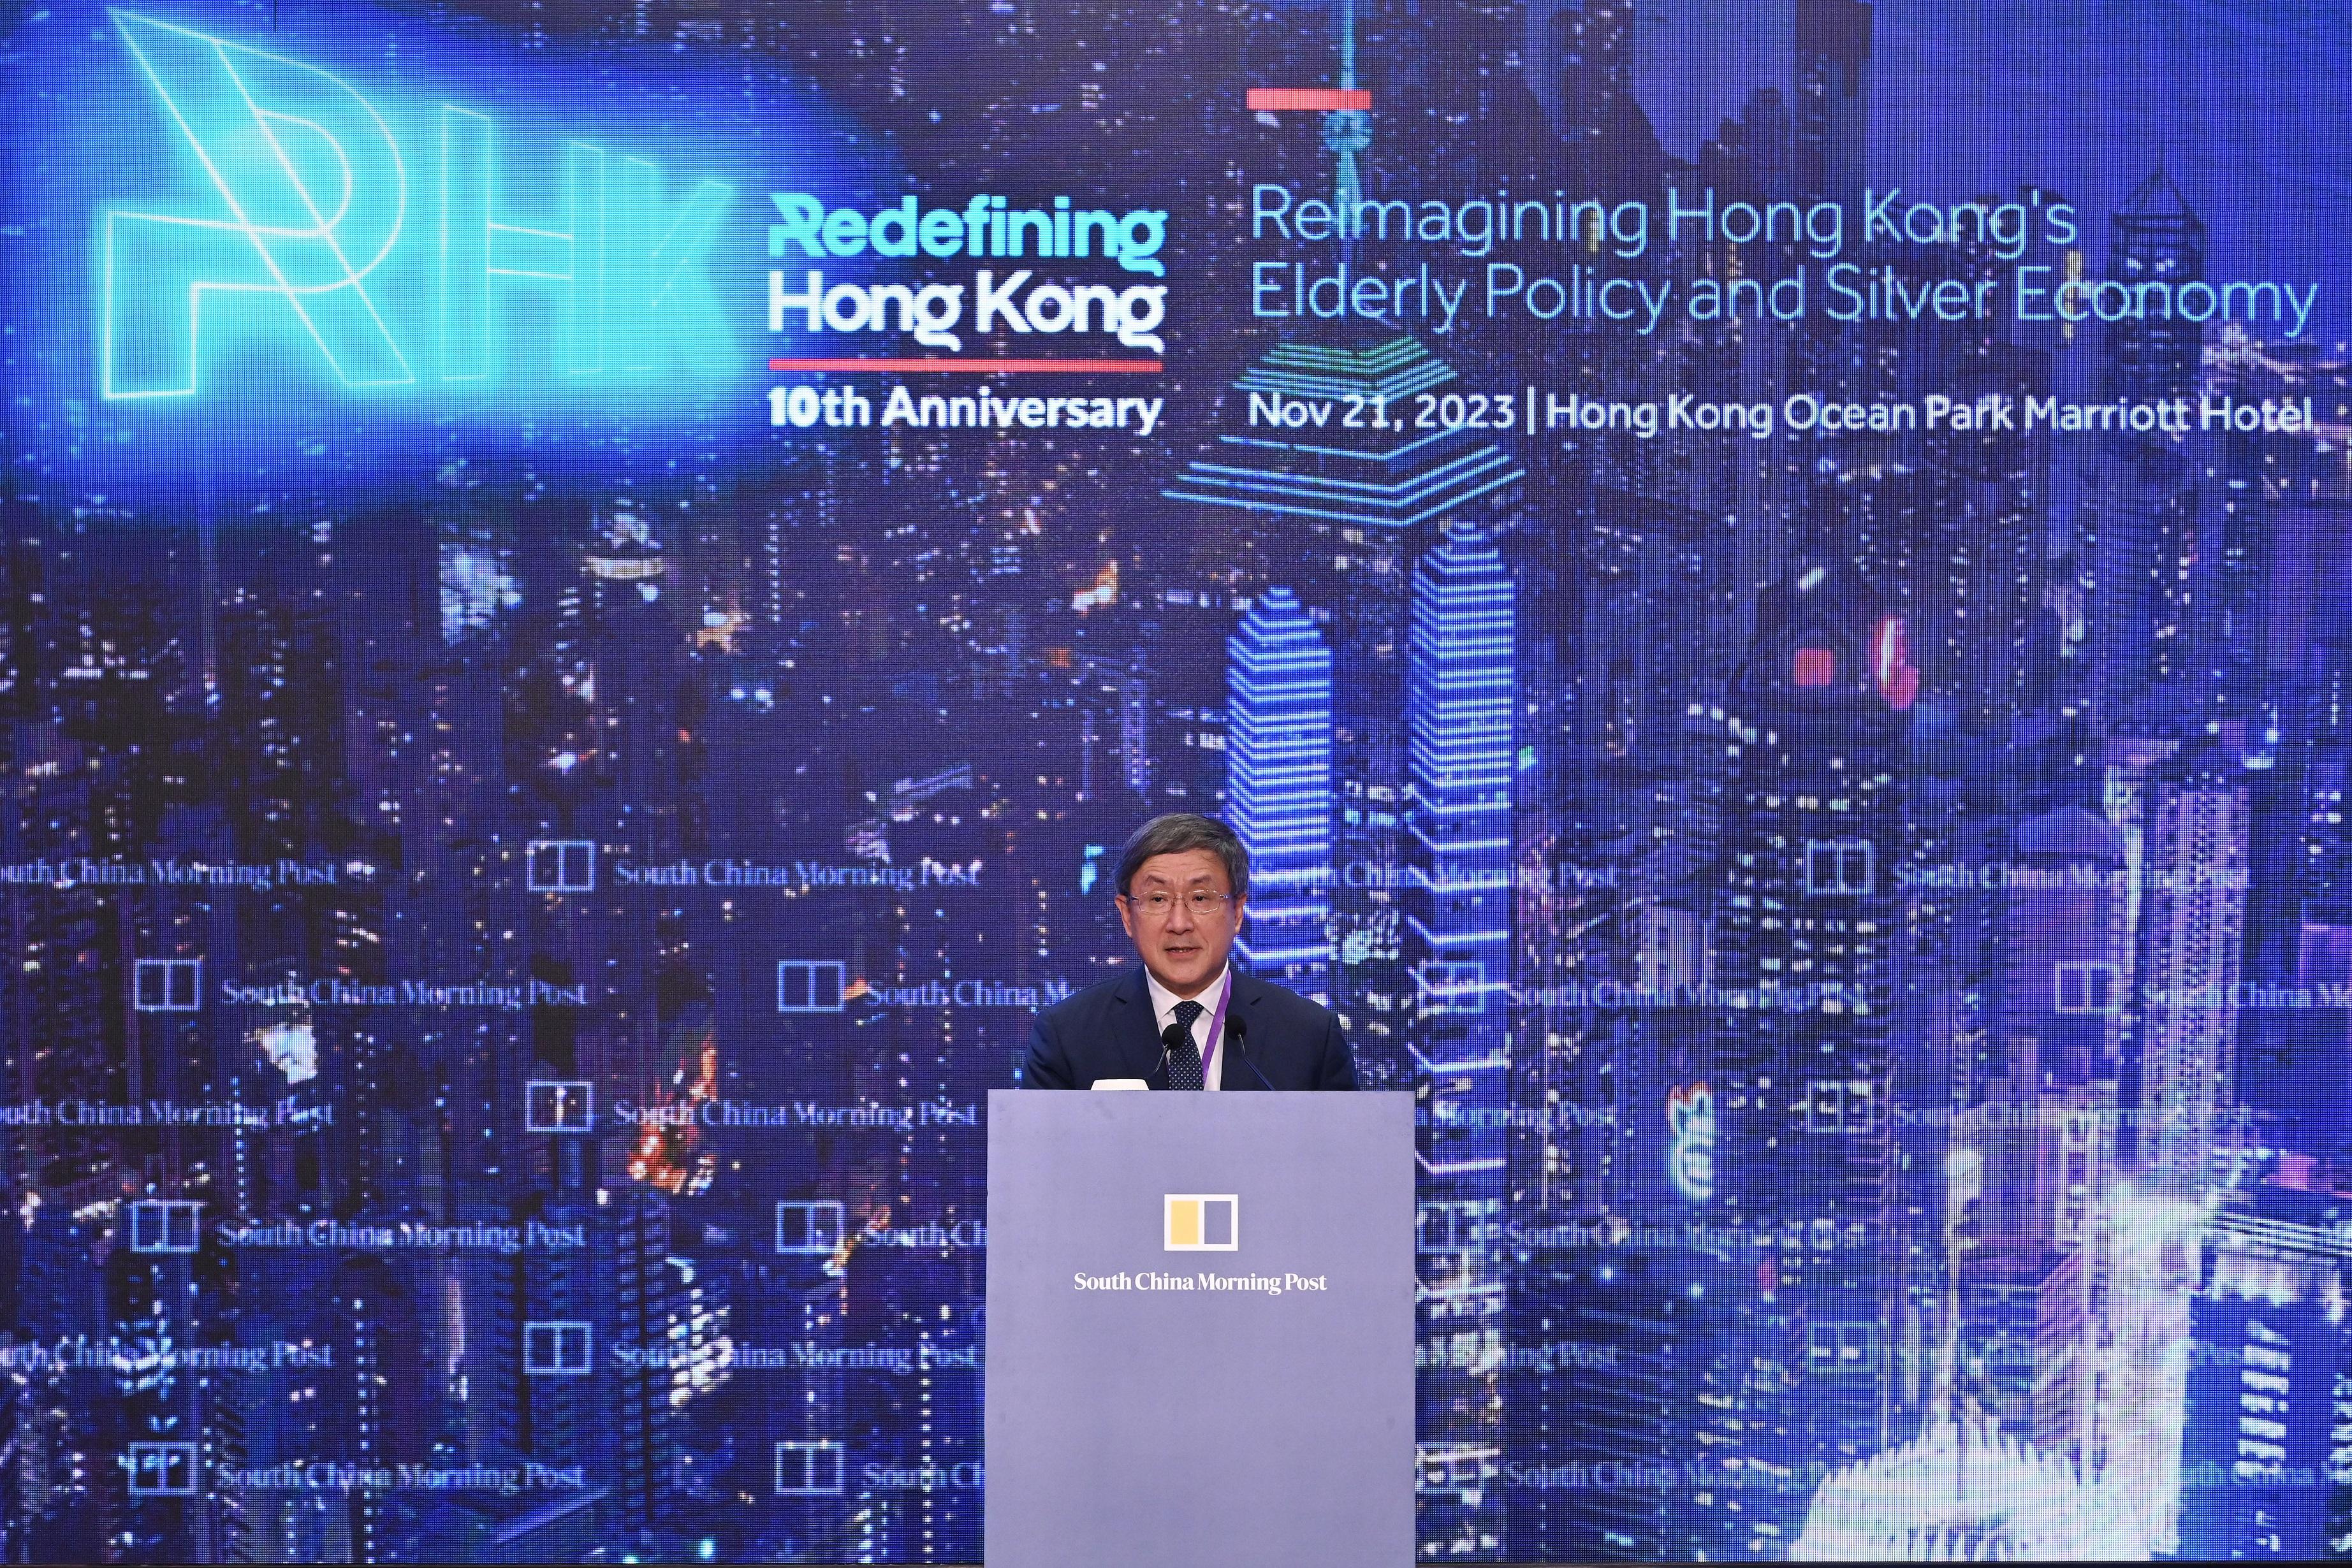 The Deputy Chief Secretary for Administration, Mr Cheuk Wing-hing, gives a keynote address at the South China Morning Post's Redefining Hong Kong Series 2023 on "Reimagining Hong Kong's Elderly Policy and Silver Economy" today (November 21).